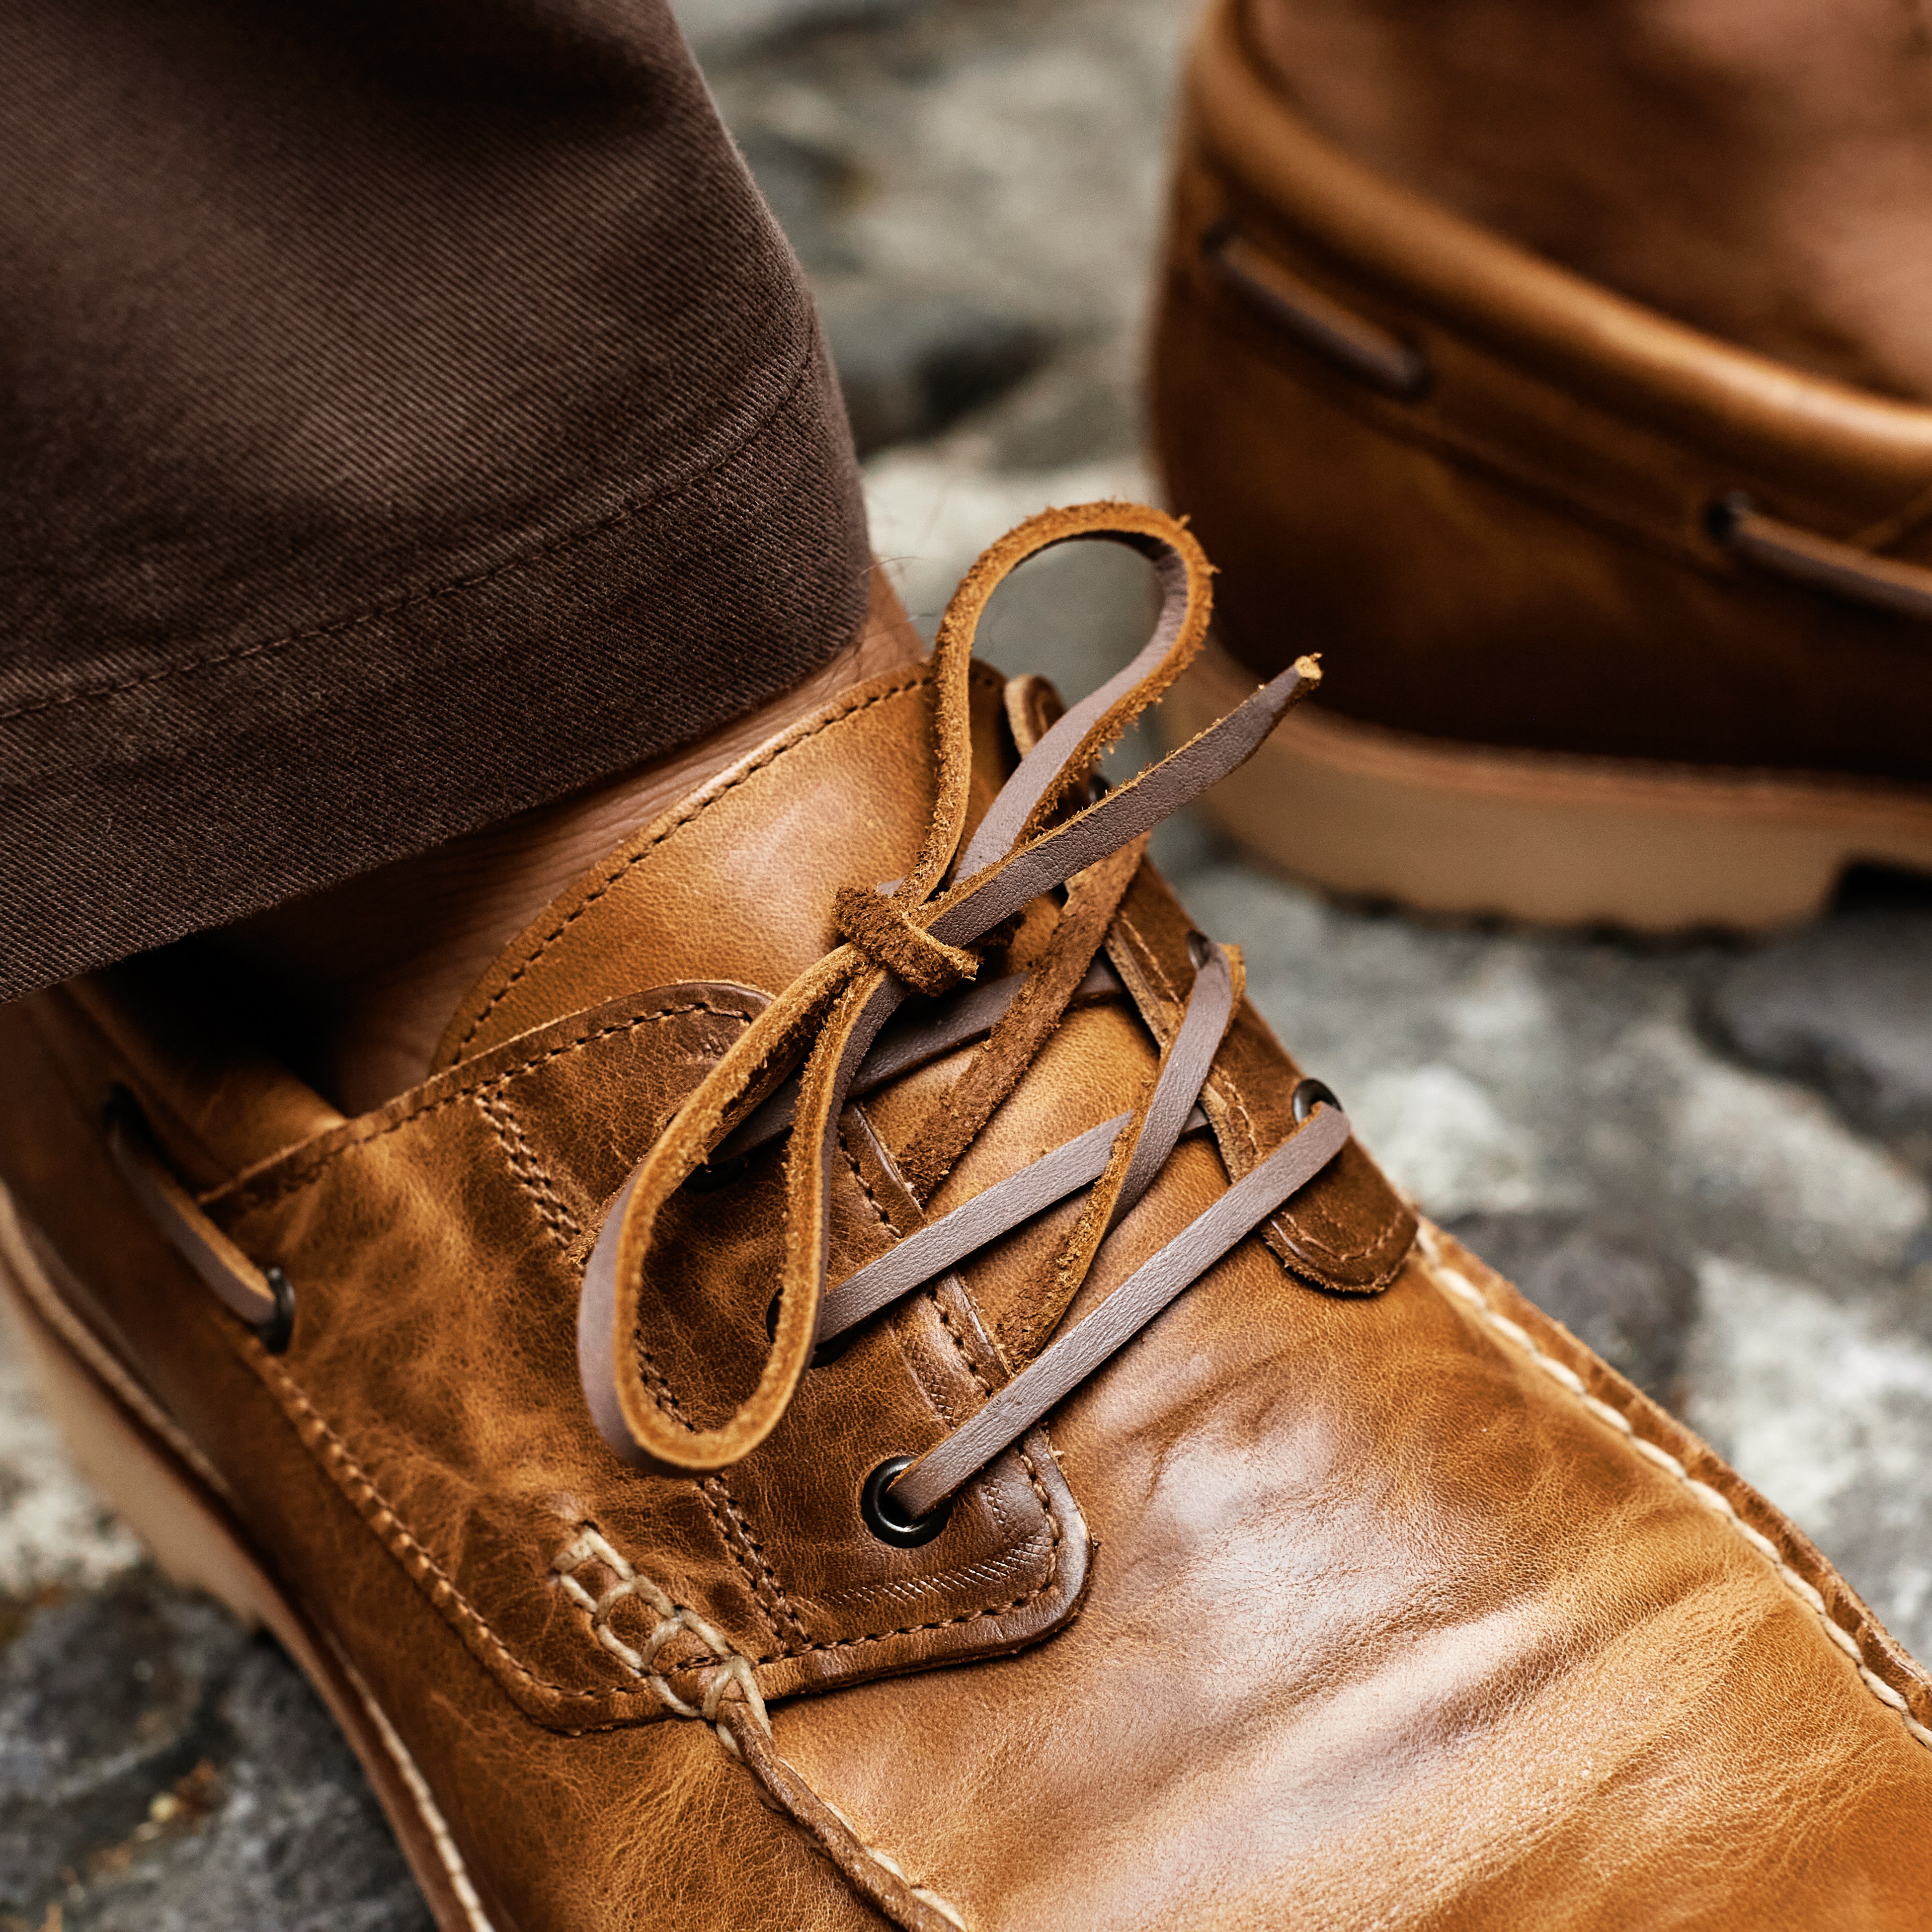 20 Best Boat Shoes for Men in 2023, Tested by Style Experts